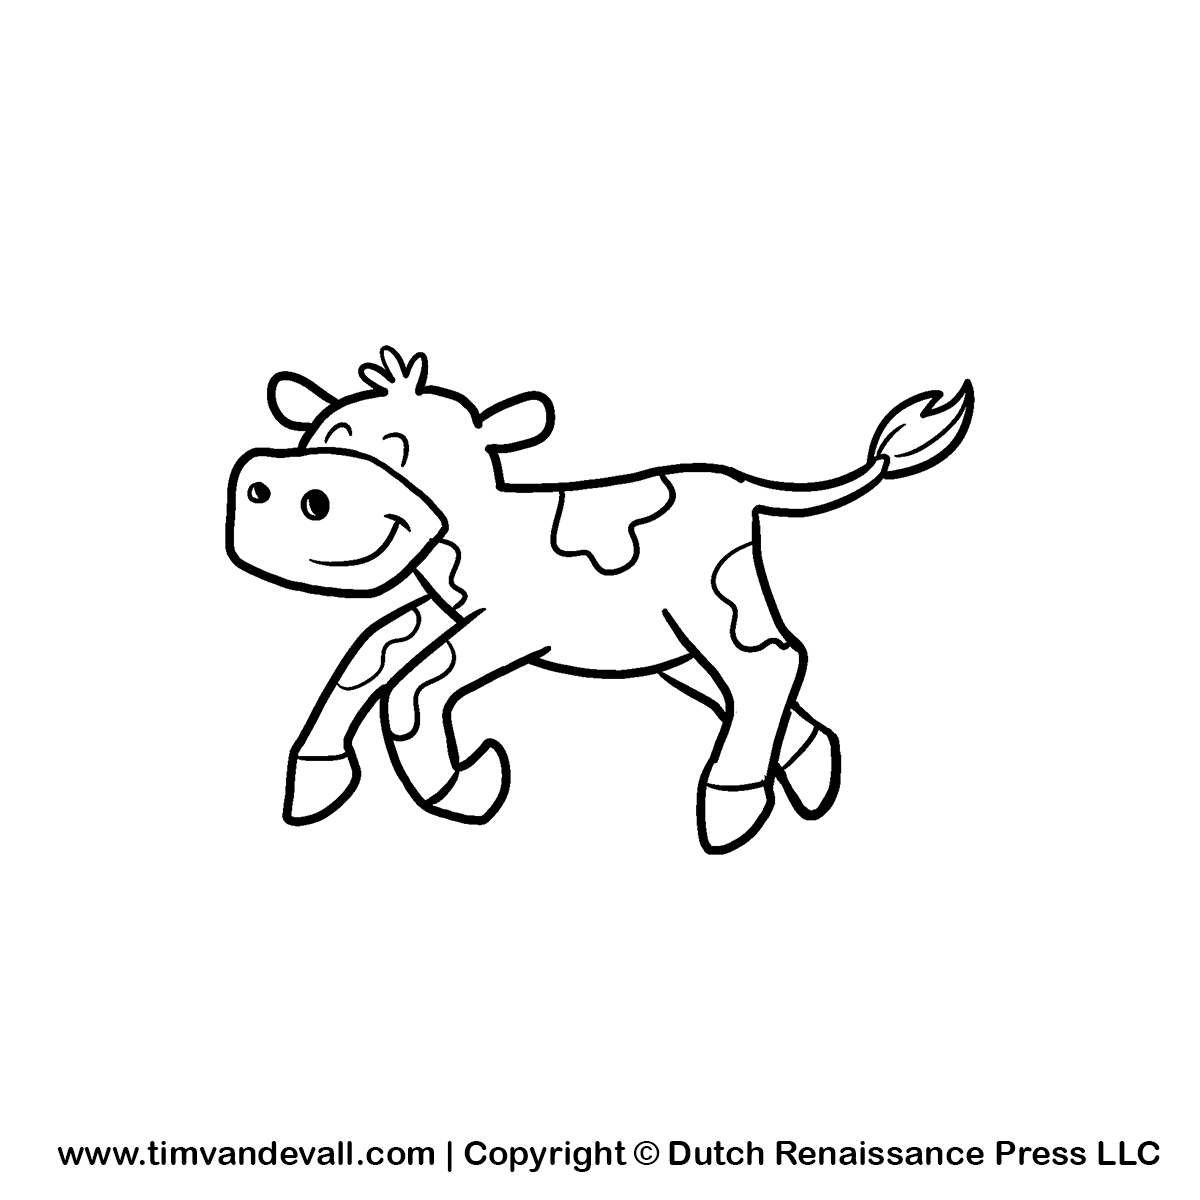 Calf Clipart Black And White   Clipart Panda   Free Clipart Images